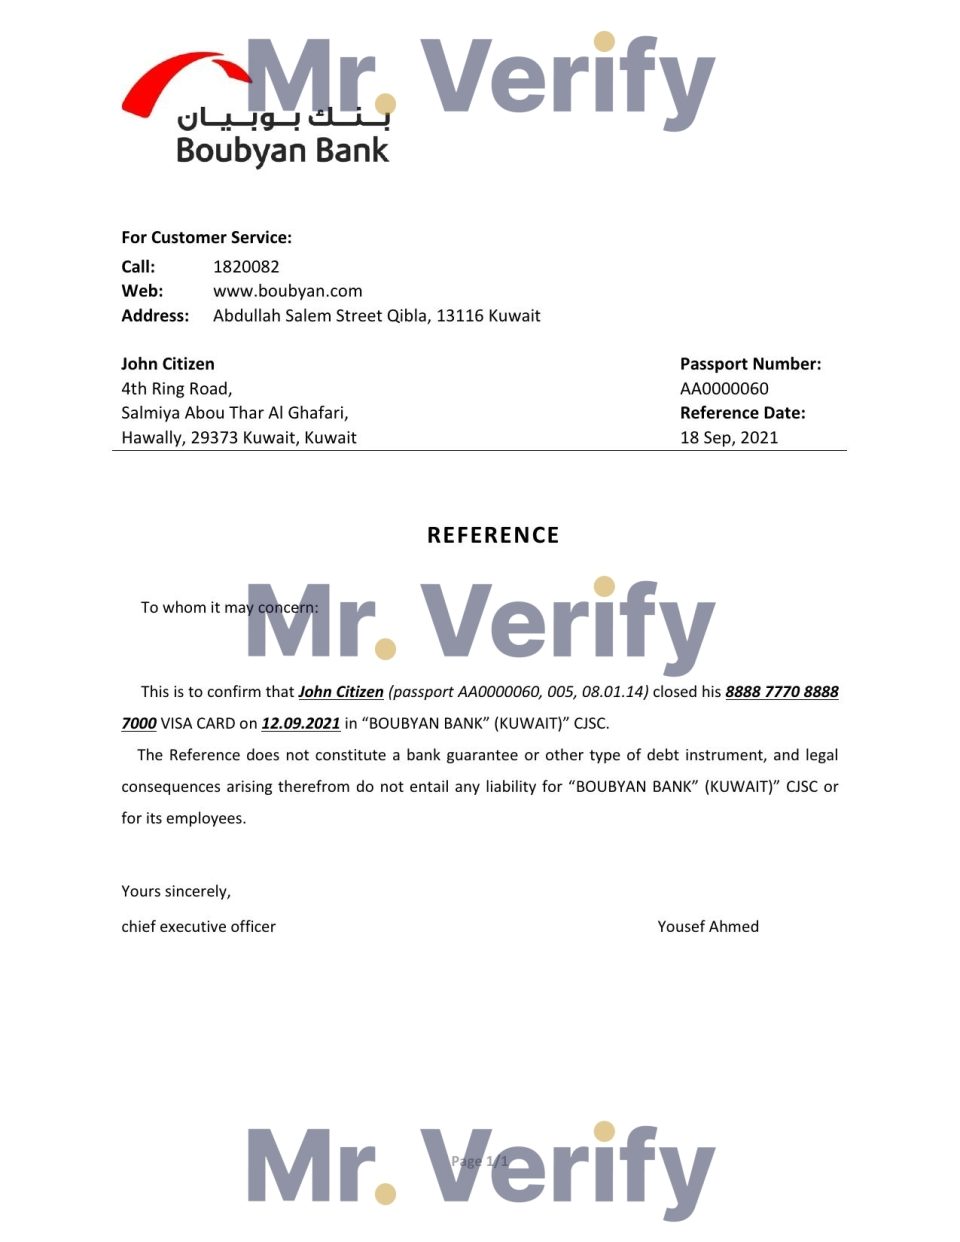 Download Kuwait Boubyan Bank Reference Letter Templates | Editable Word